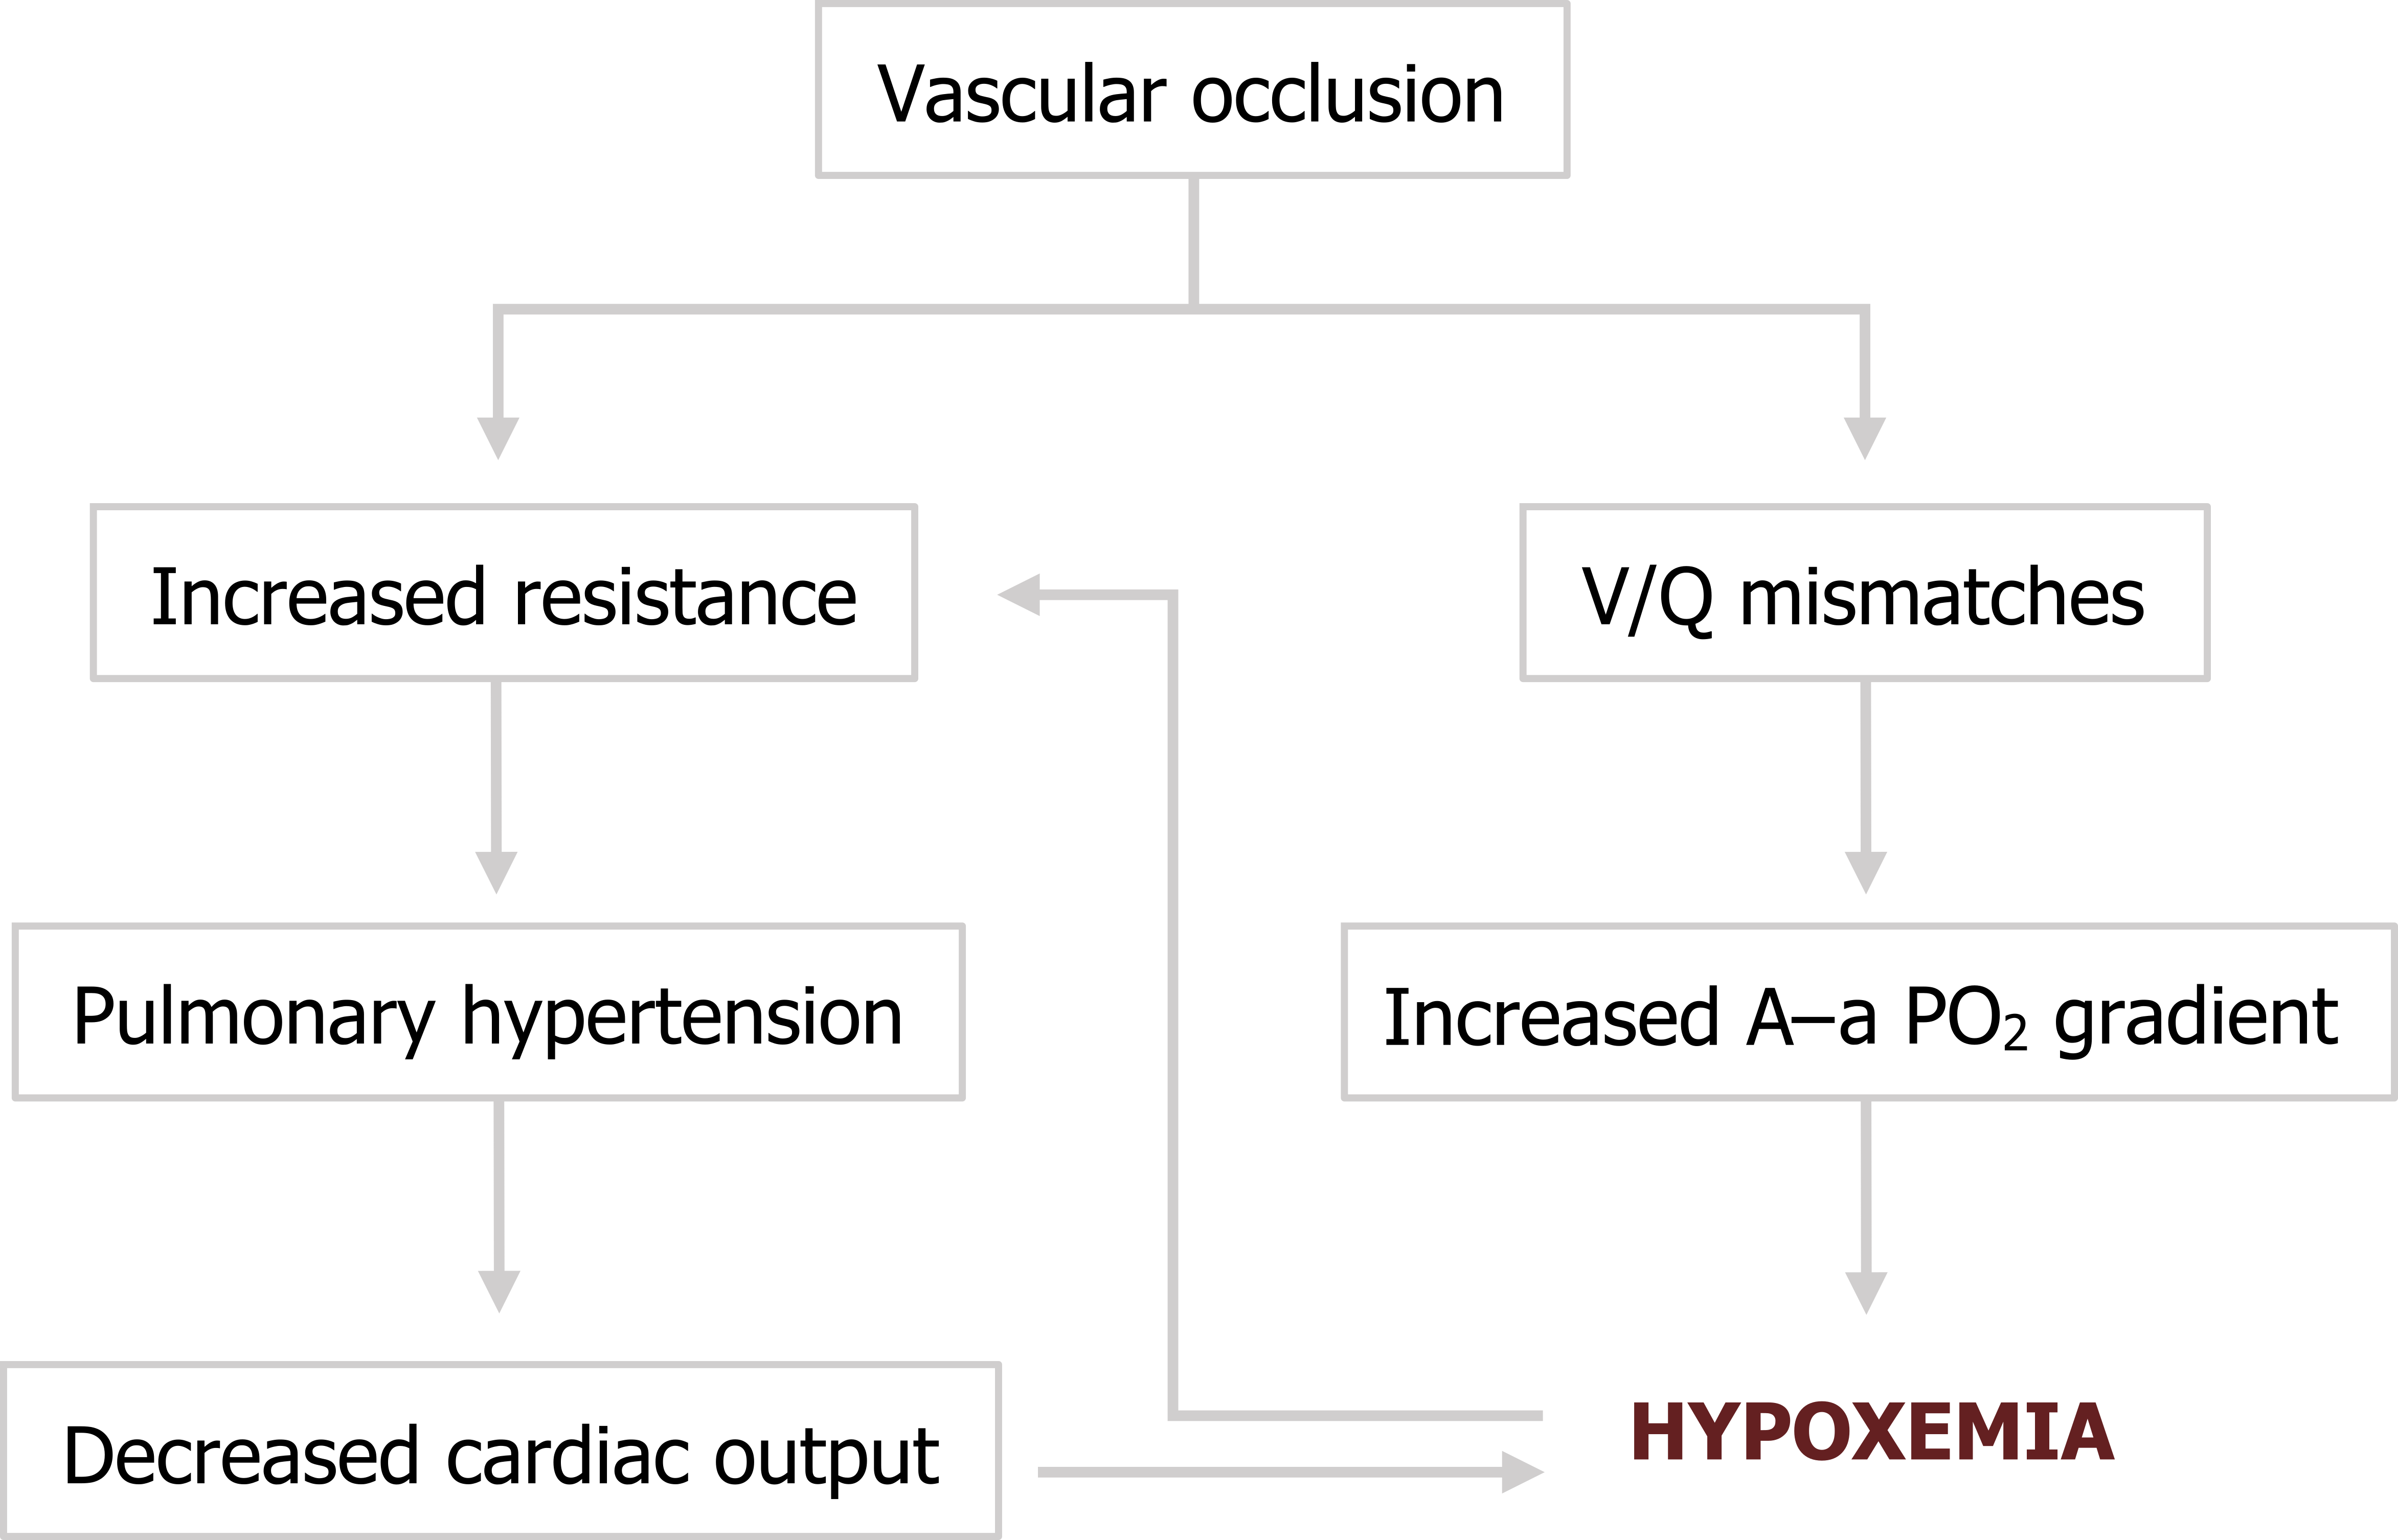 Vascular occlusion arrow to increased resistance arrow to pulmonary hypertension arrow to decreased cardiac output arrow to hypoxemia. Vascular occlusion arrow to V/Q mismatches arrow to increased A-a PO2 gradient arrow to hypoxemia. Hypoxemia arrow to increased resistance